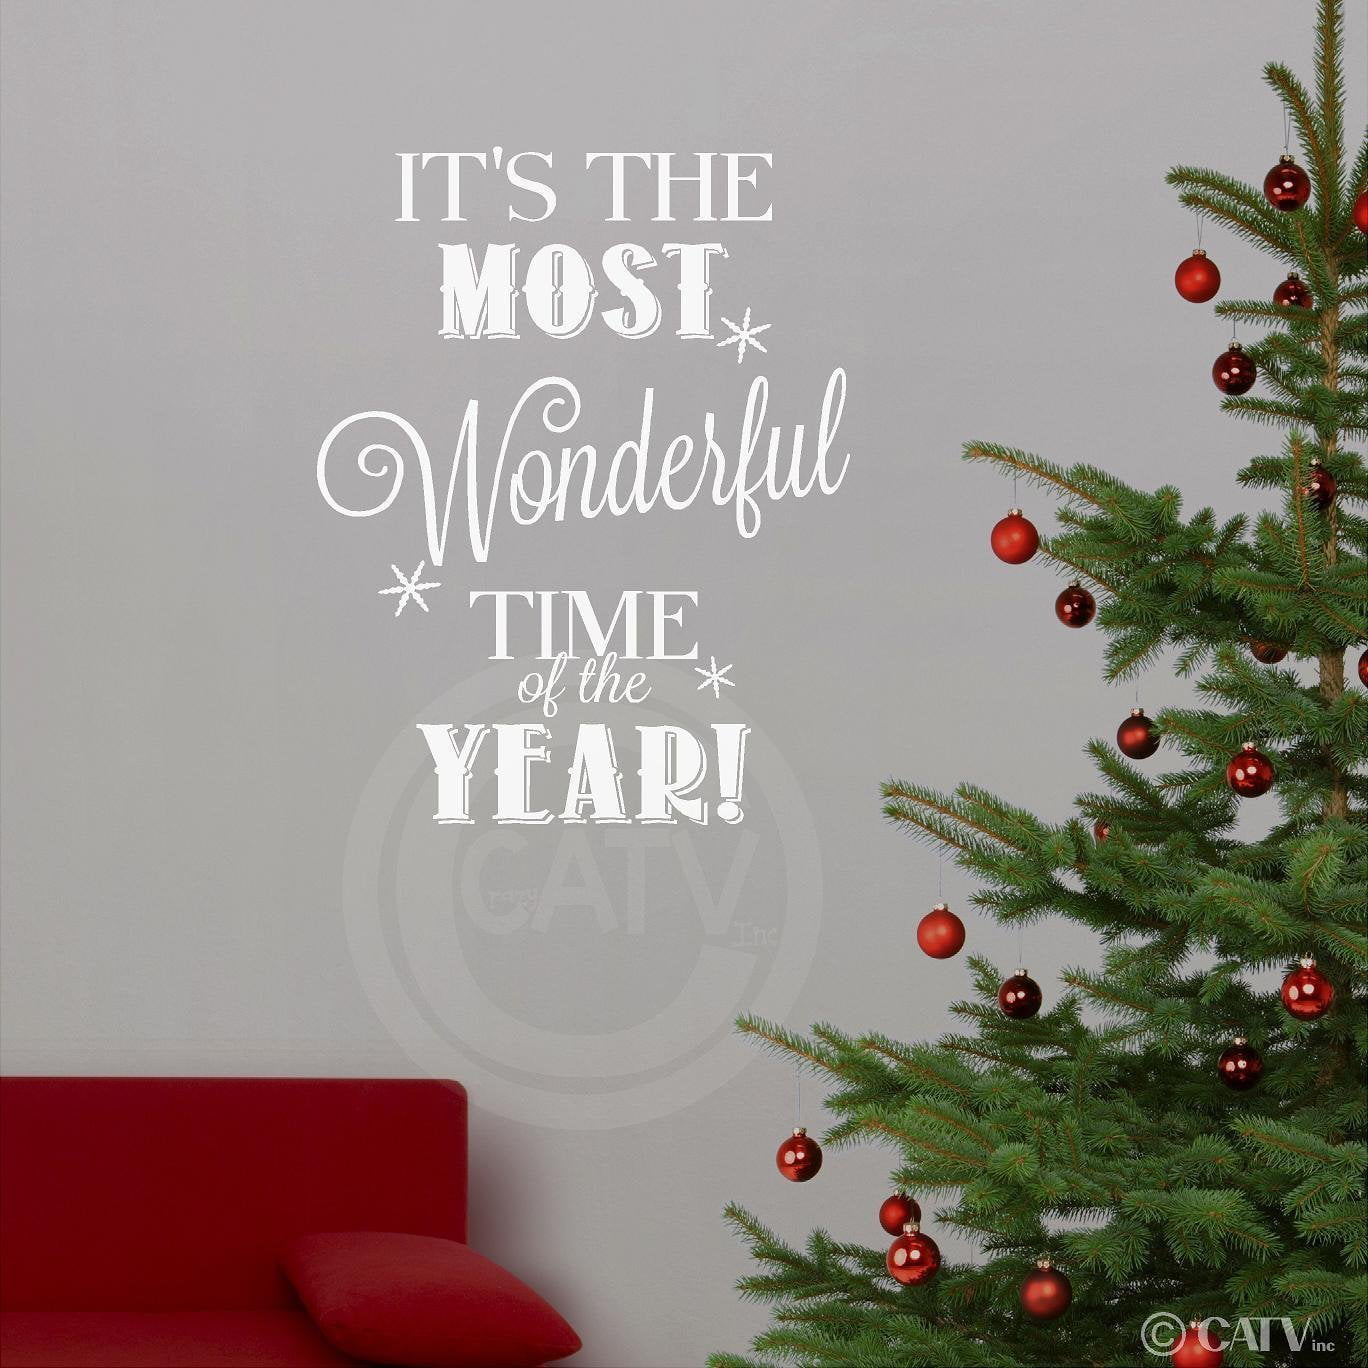 Window Wall Vinyl Decal Sticker,any colour S MOST WONDERFUL TIME OF THE YEAR